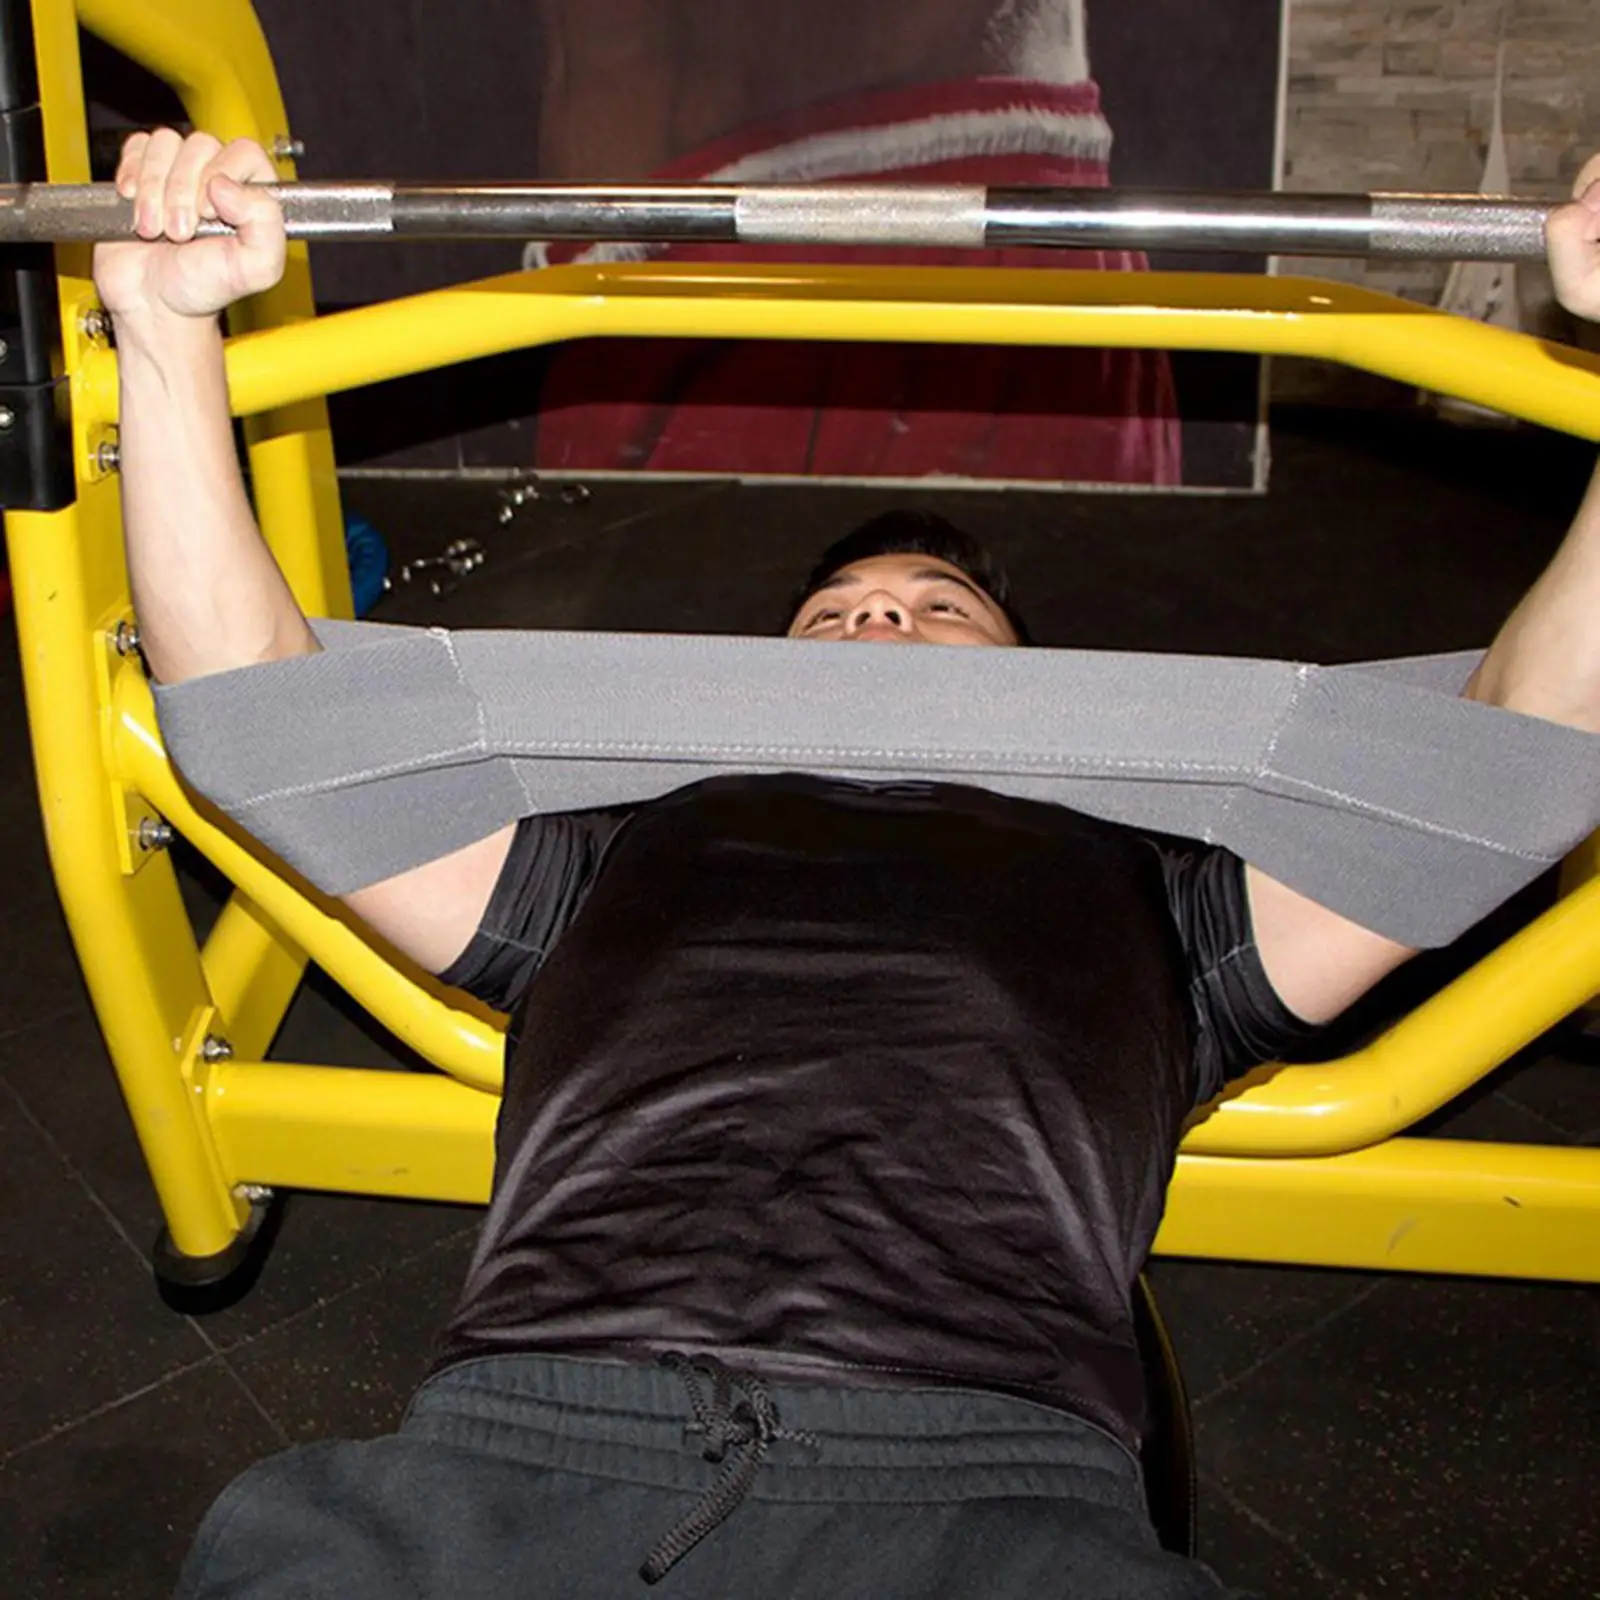 Bench Press , Elbow Shoulder , Assistance Bands  Resistance for Exercise Performance and Assistance